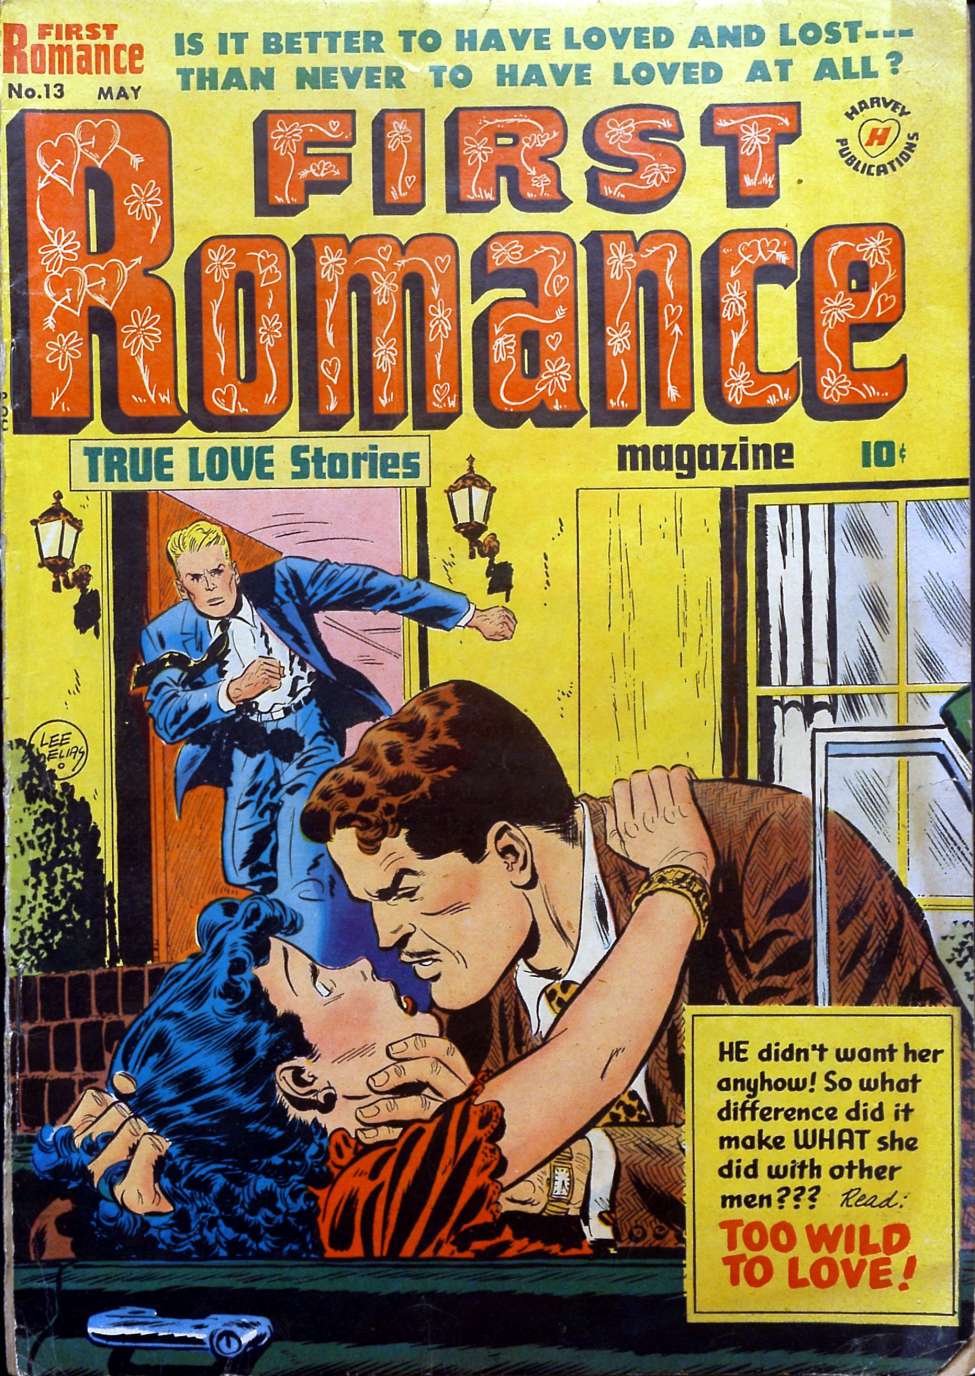 Book Cover For First Romance Magazine 13